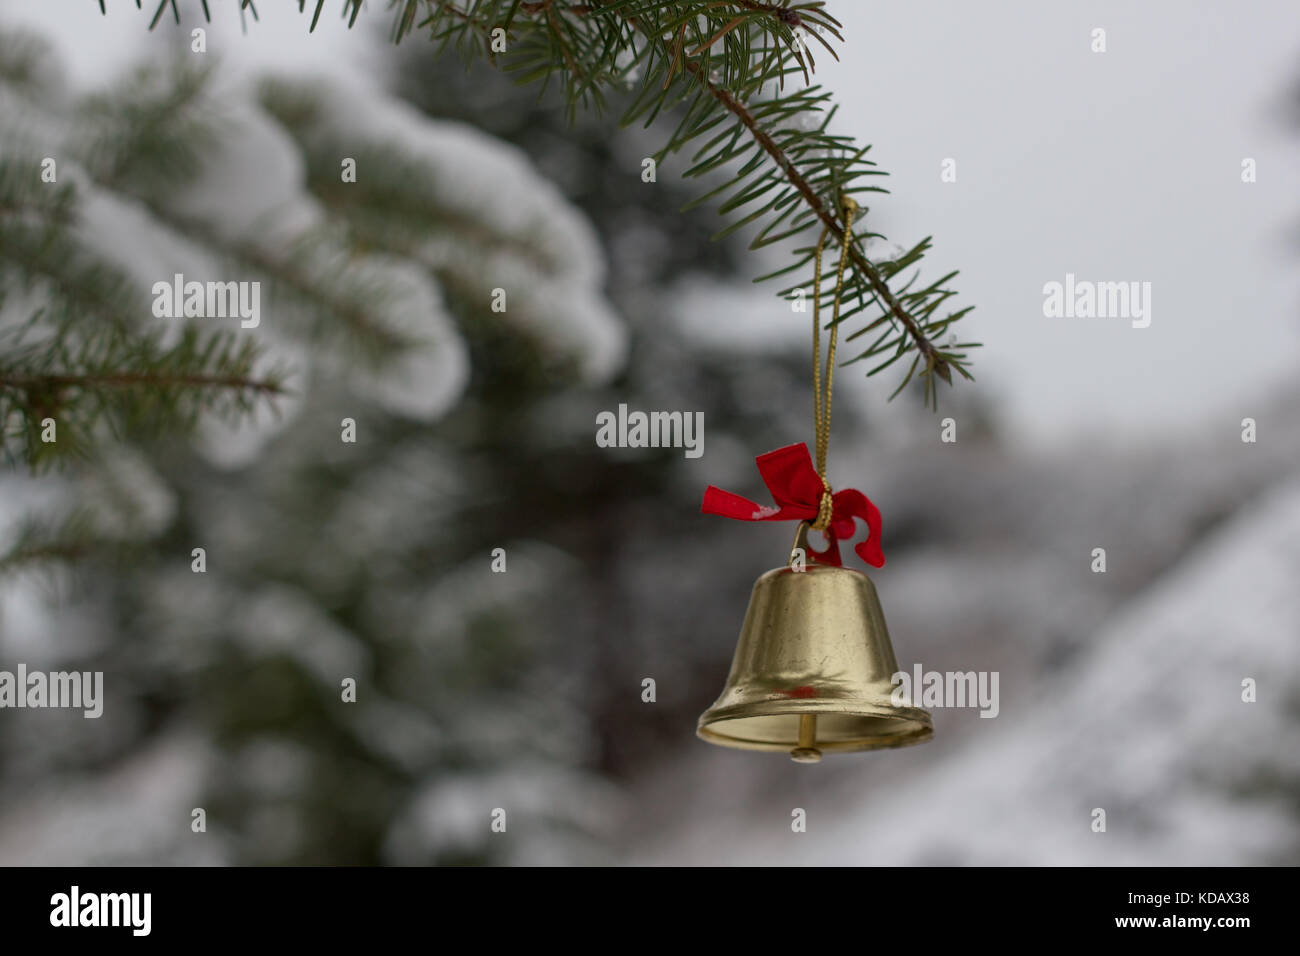 Gold Christmas bell with red ribbon on an evergreen tree branch outdoors on a snowy day Stock Photo